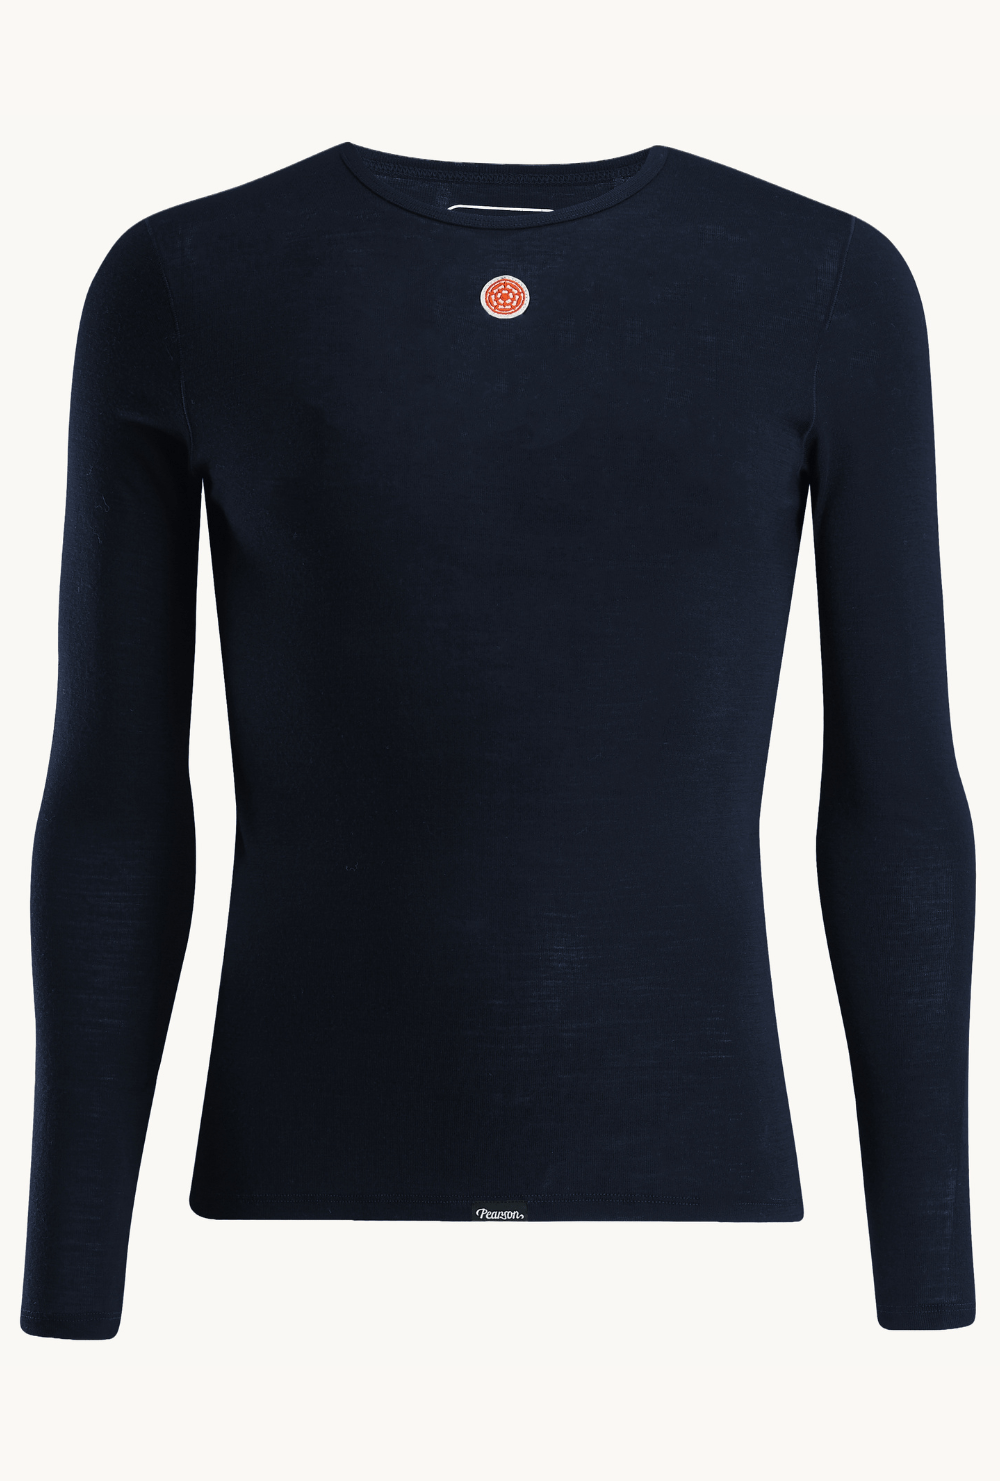 Pearson 1860  Skin In The Game - Long Sleeve Base Layer Navy Blue  Navy Blue / Large